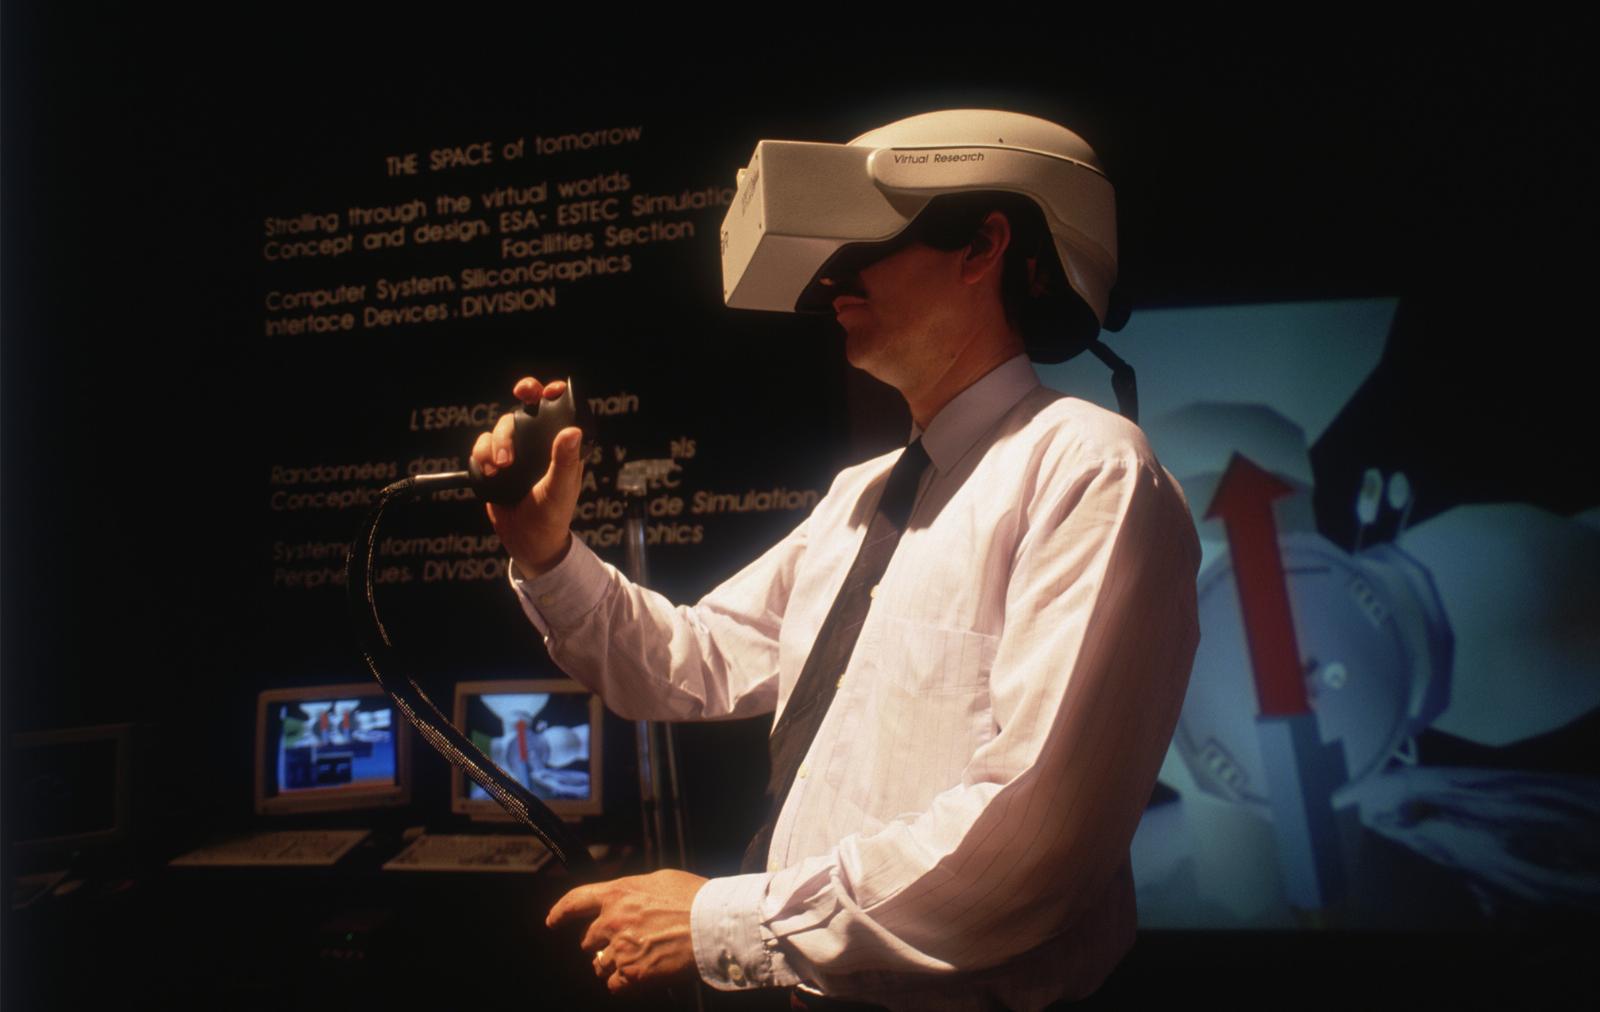 A brief history of VR and AR